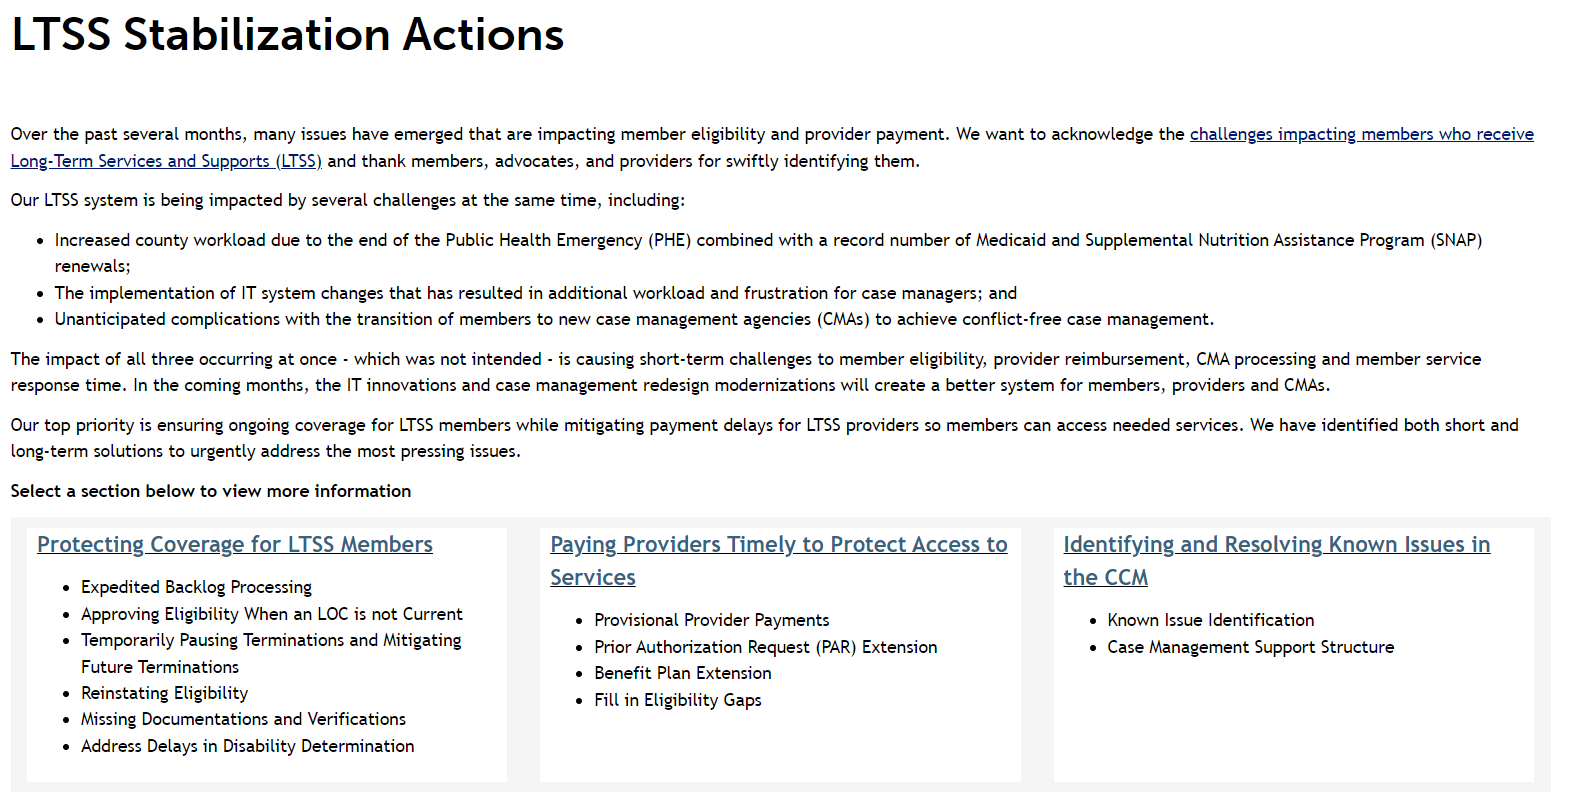 Screenshot of the LTSS Stabilization Actions page